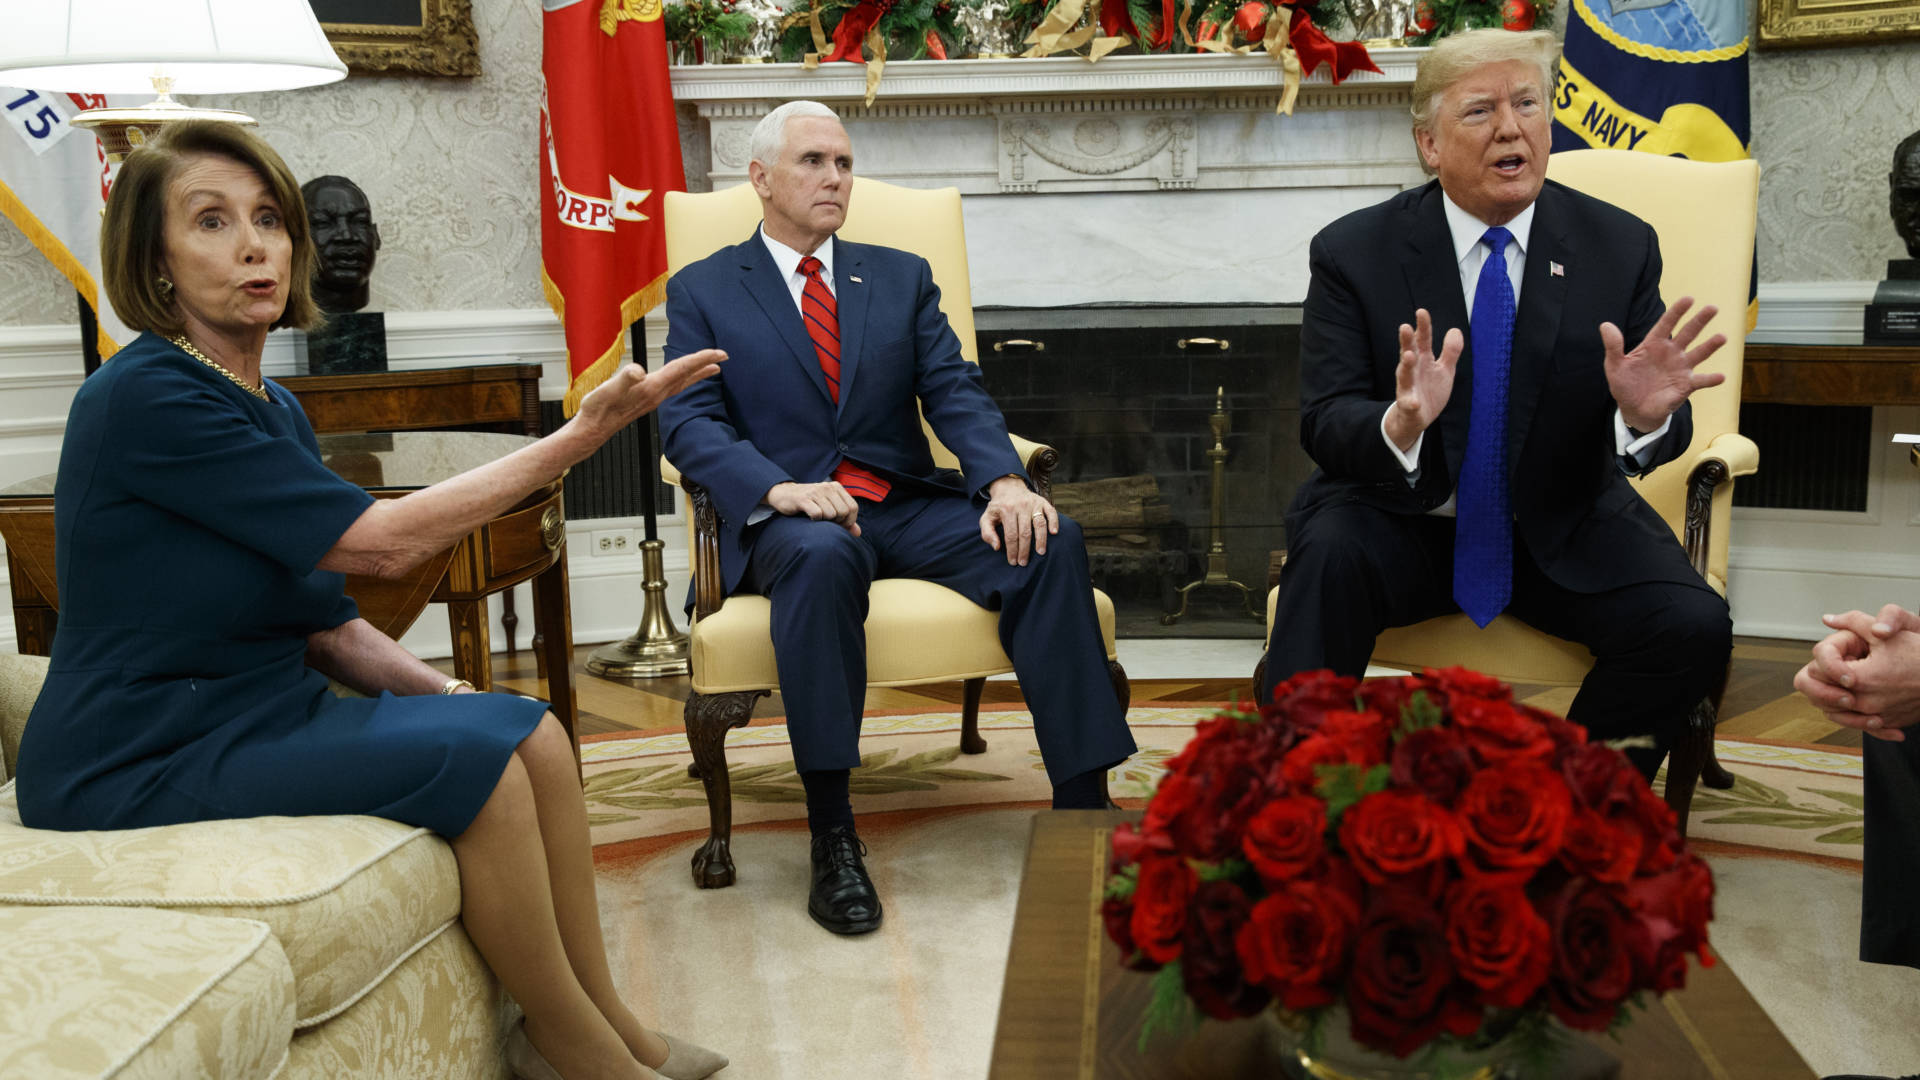 Vice President Mike Pence, looks on as now-House Speaker Nancy Pelosi argues with President Trump during a meeting in the Oval Office last month. Evan Vucci/AP